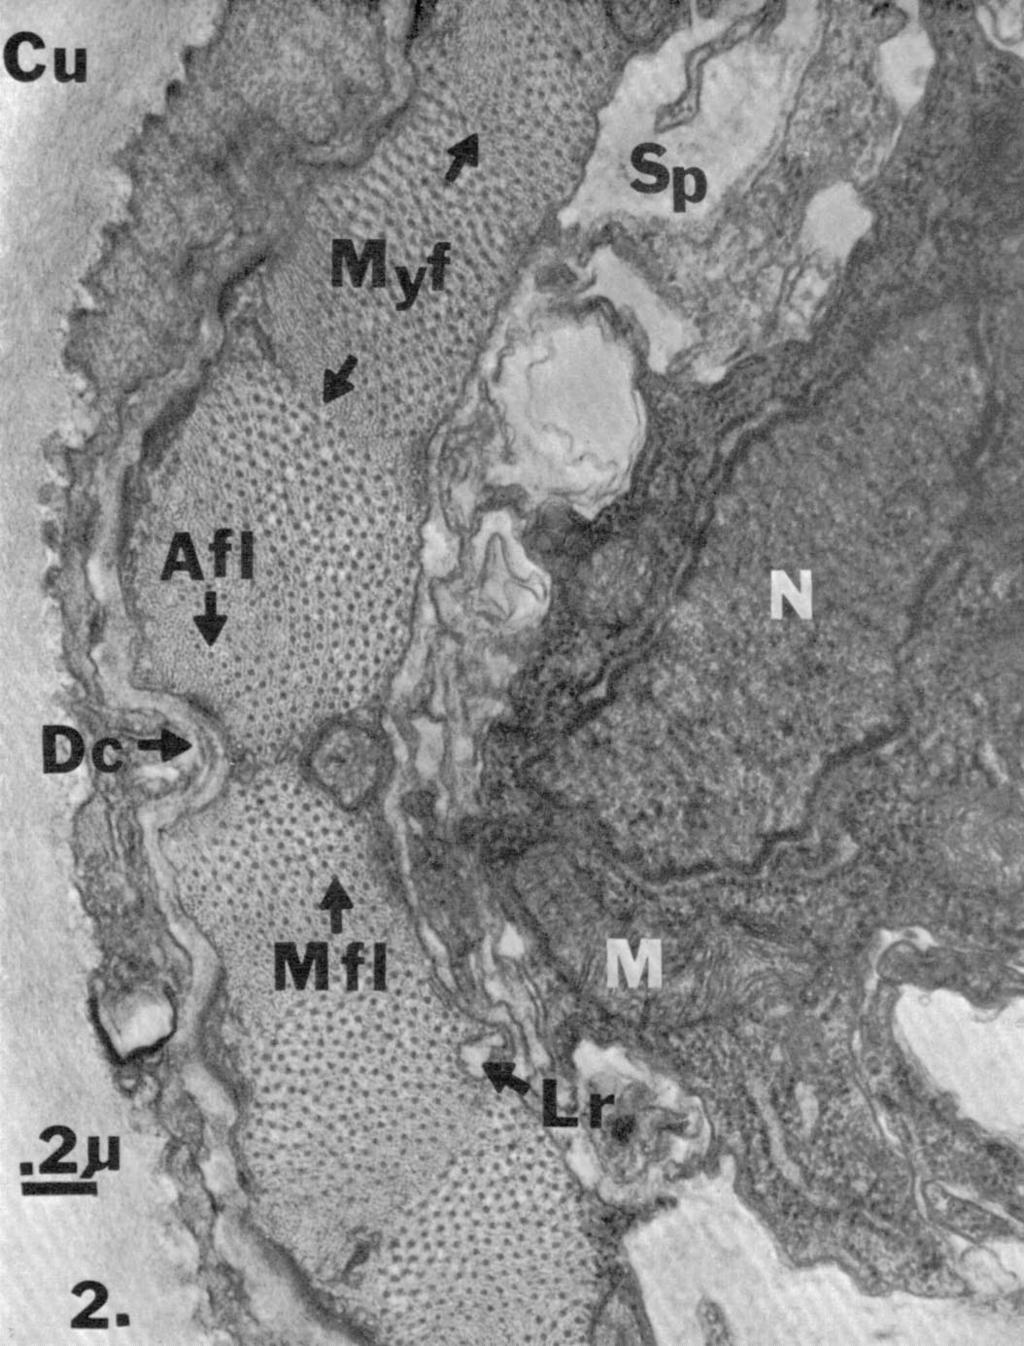 Transverse section of posterior dorsal somatic muscle cell of Trichodorus porosus: